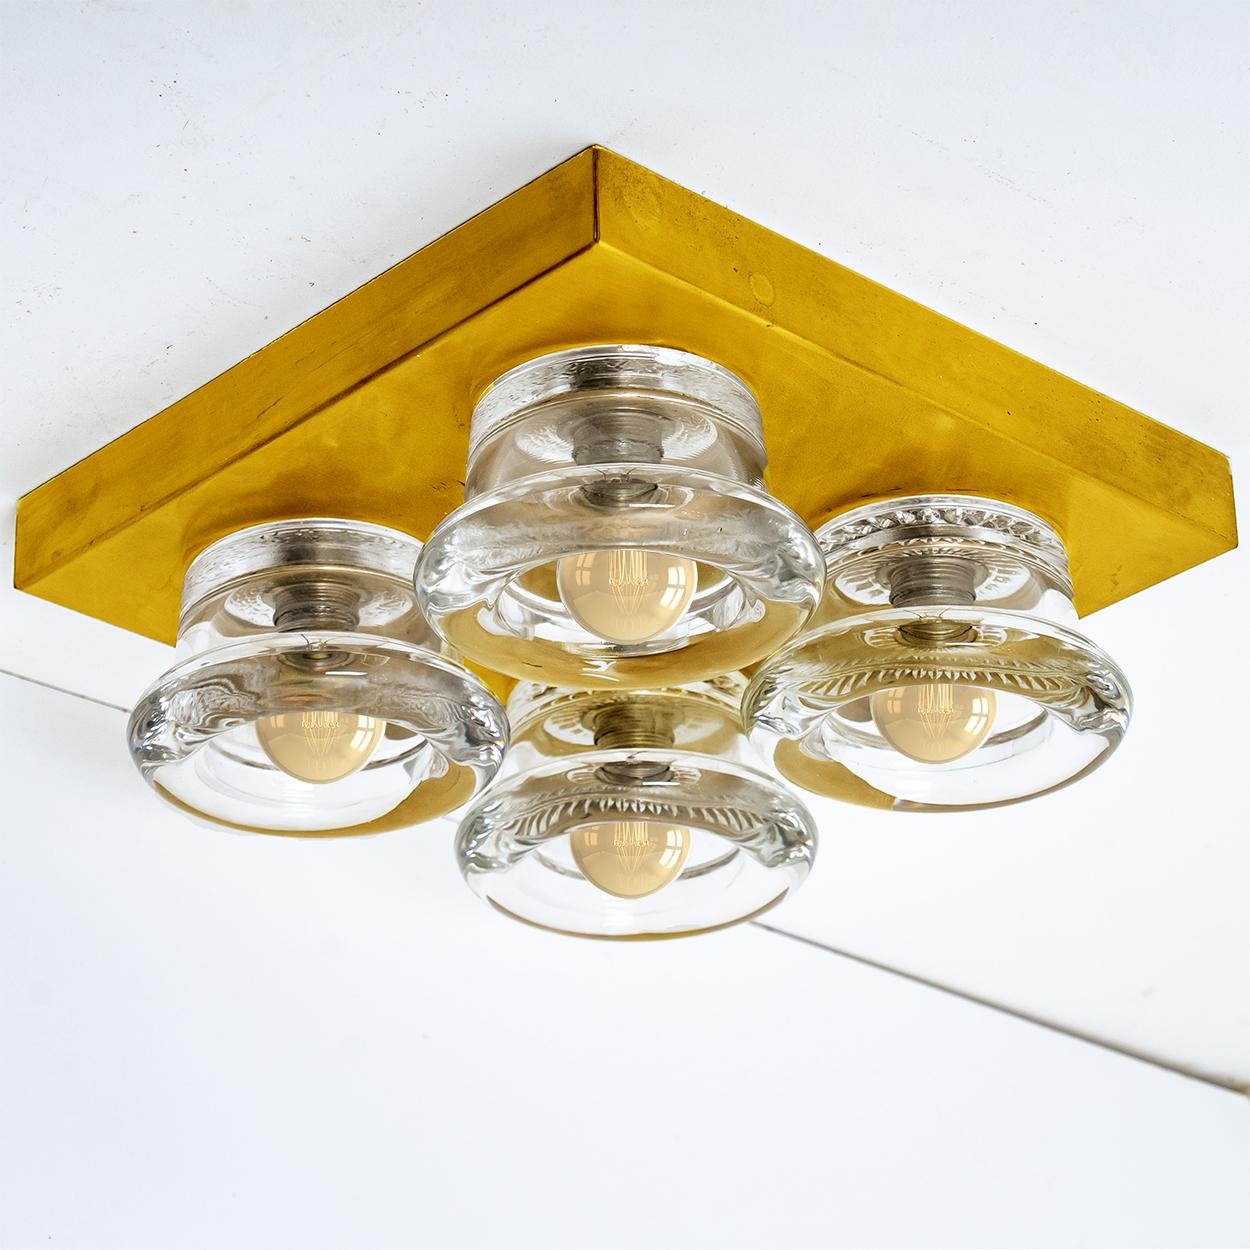 One of the six original glass wall sconces flush mounts Cosack Lights, Germany, 1970s

Original 1970s modernist wall light with four glass lighting elements. This light was designed and produced by Cosack Lights, one of the premium light producer is